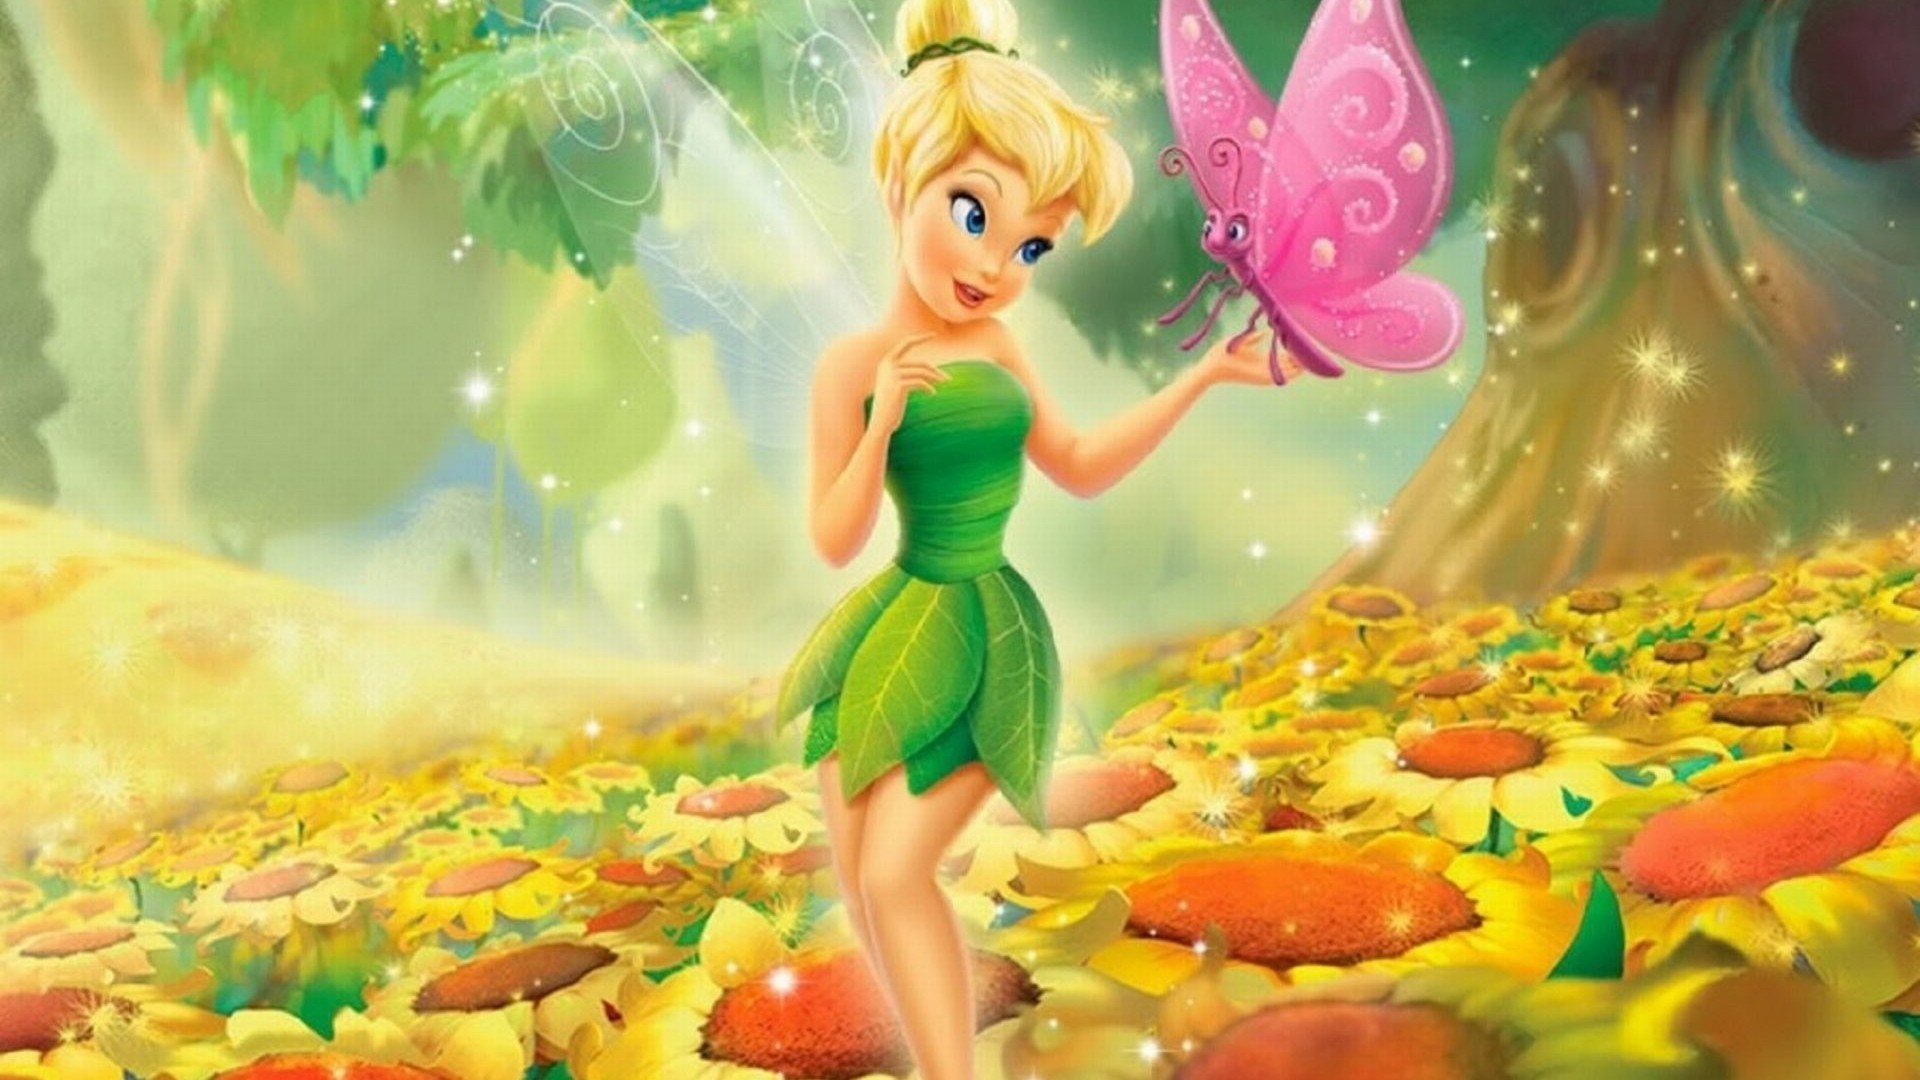 1920x1080  Free Tinkerbell Screensavers and Wallpaper | Wallpapers For  Desktop | Pinterest | Tinkerbell, Wallpaper and Disney drawings